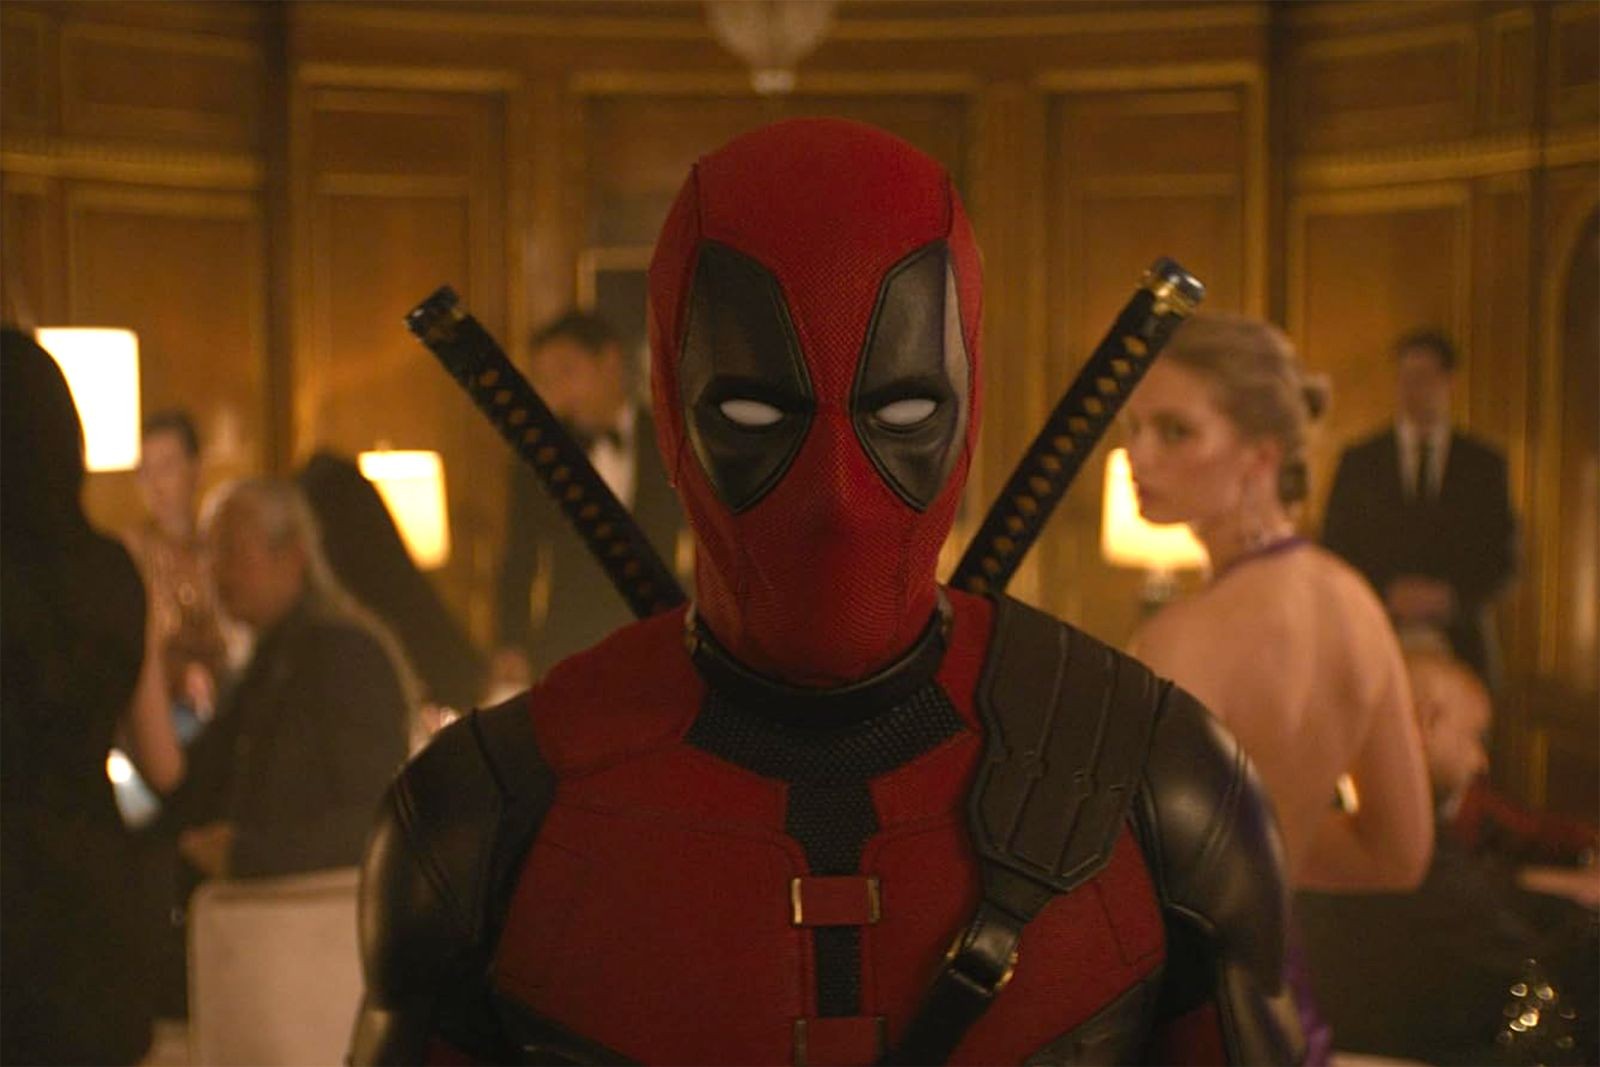 Deadpool & Wolverine will feature some X-Men characters before Marvel comes up with an X-Men movie